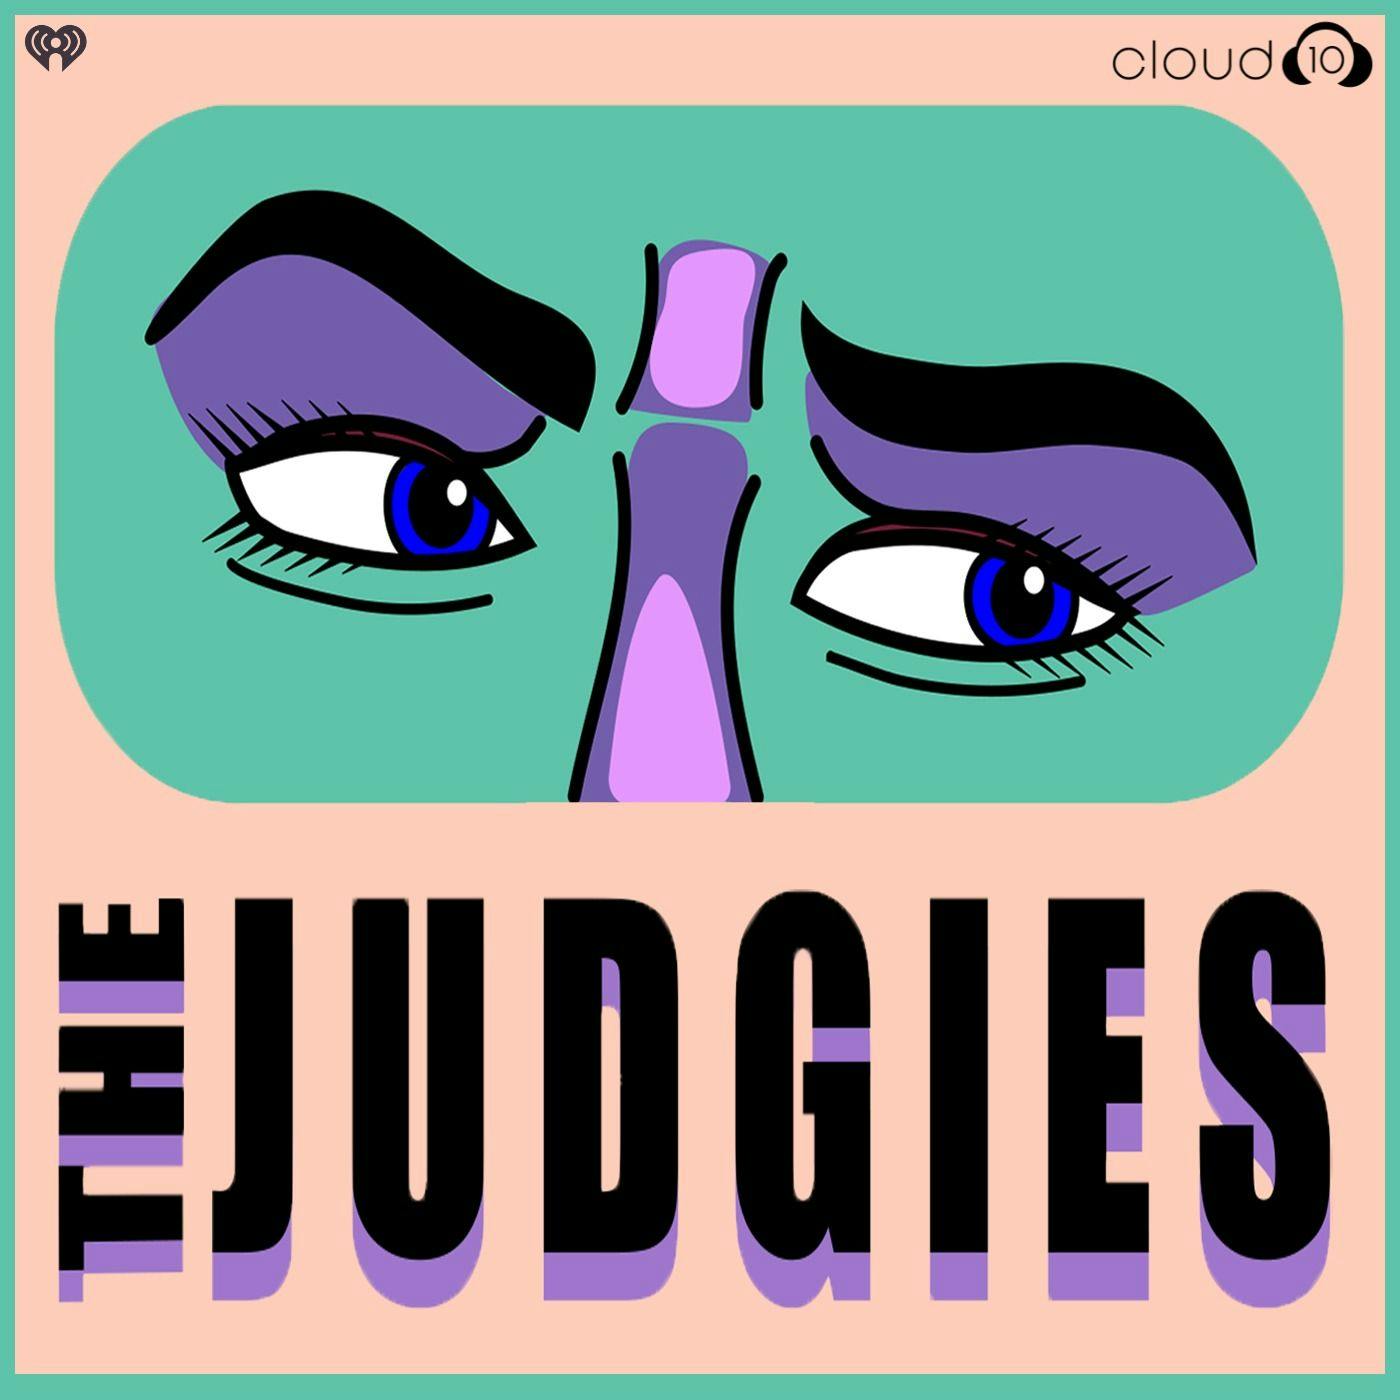 The Judgies:Cloud10 and iHeartPodcasts